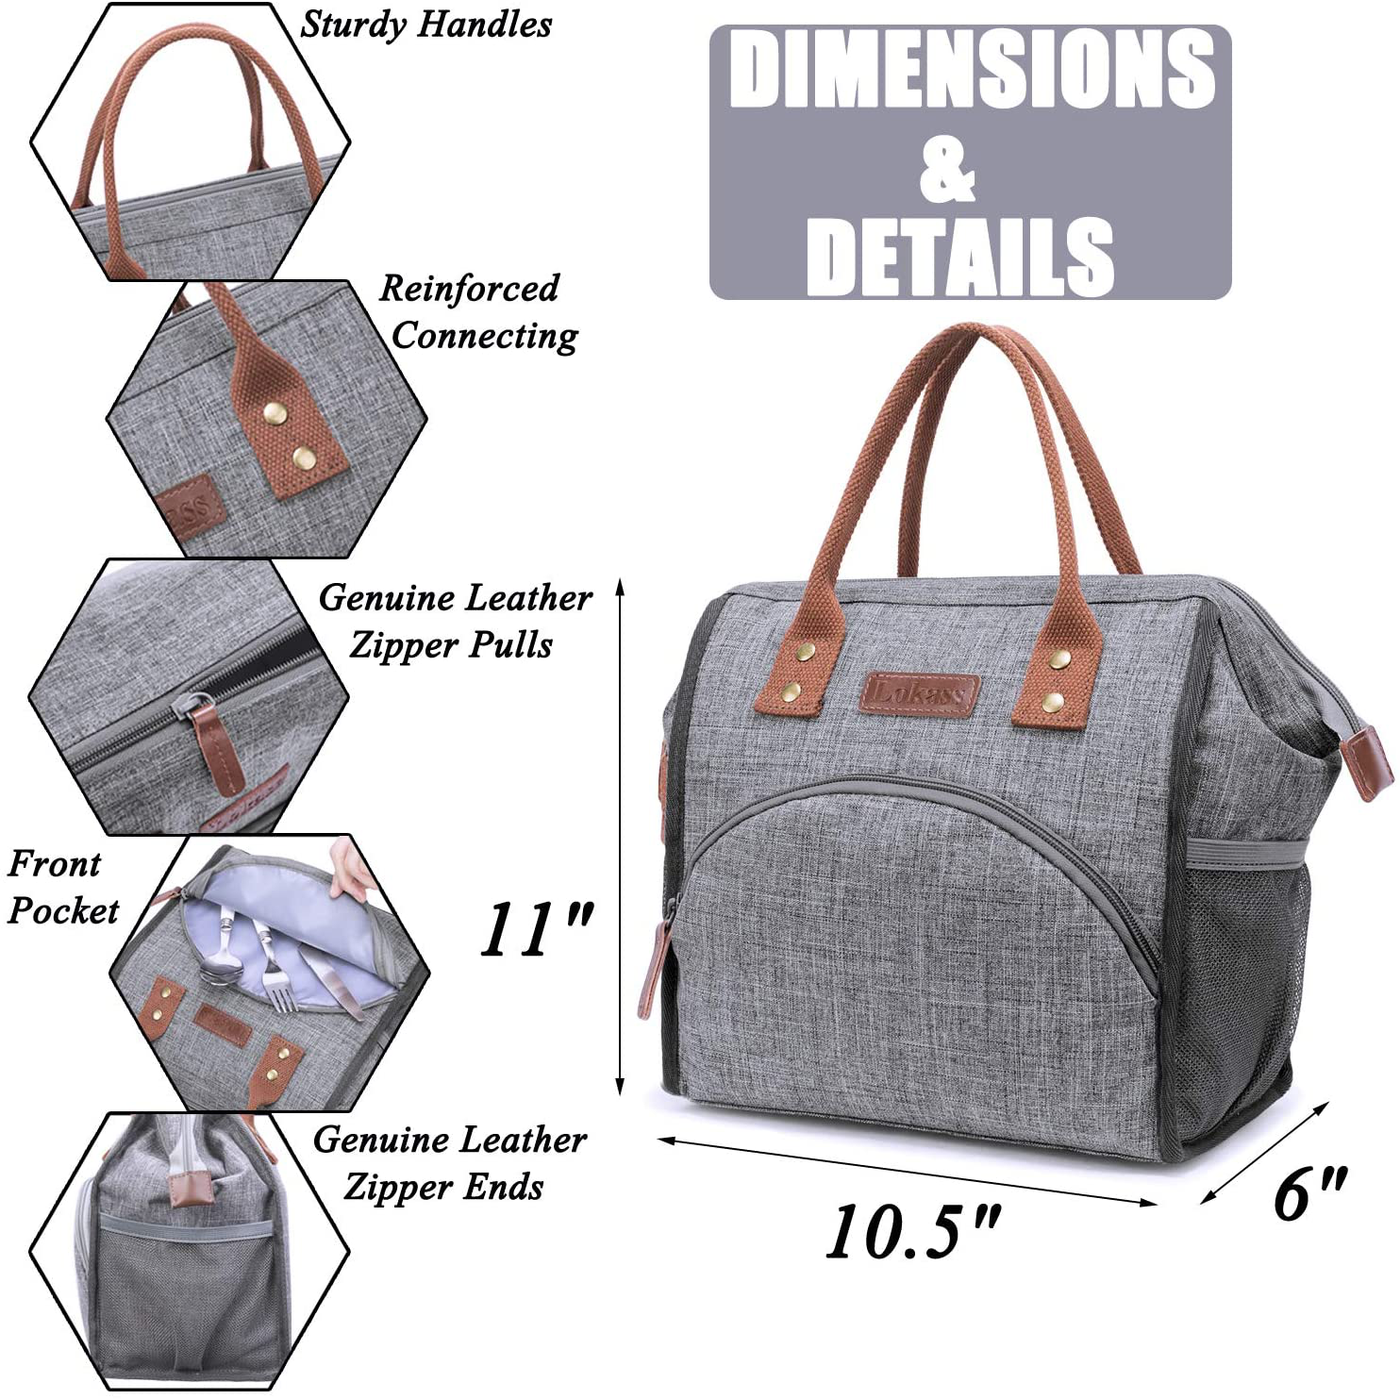 LOKASS Lunch Bag Insulated Lunch Box Wide-Open Lunch Tote Bag Large Drinks Holder Durable Nylon Thermal Snacks Organizer for Women Men Adults College Work Picnic Hiking Beach Fishing,Grey